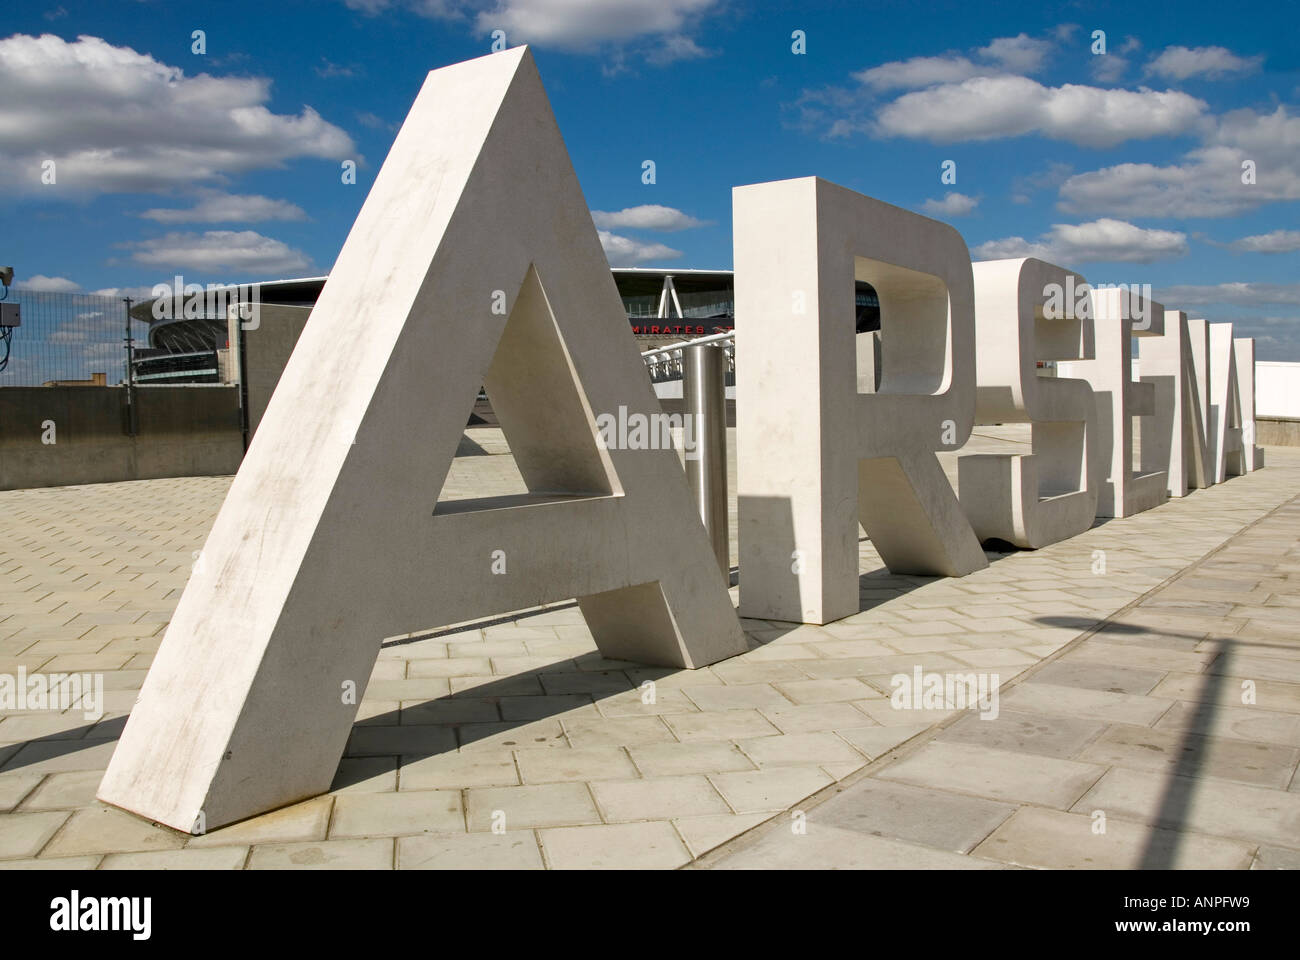 Arsenal FC football club new Emirates stadium with roadside stone sign letters across one of the approaches Holloway Islington North London England UK Stock Photo